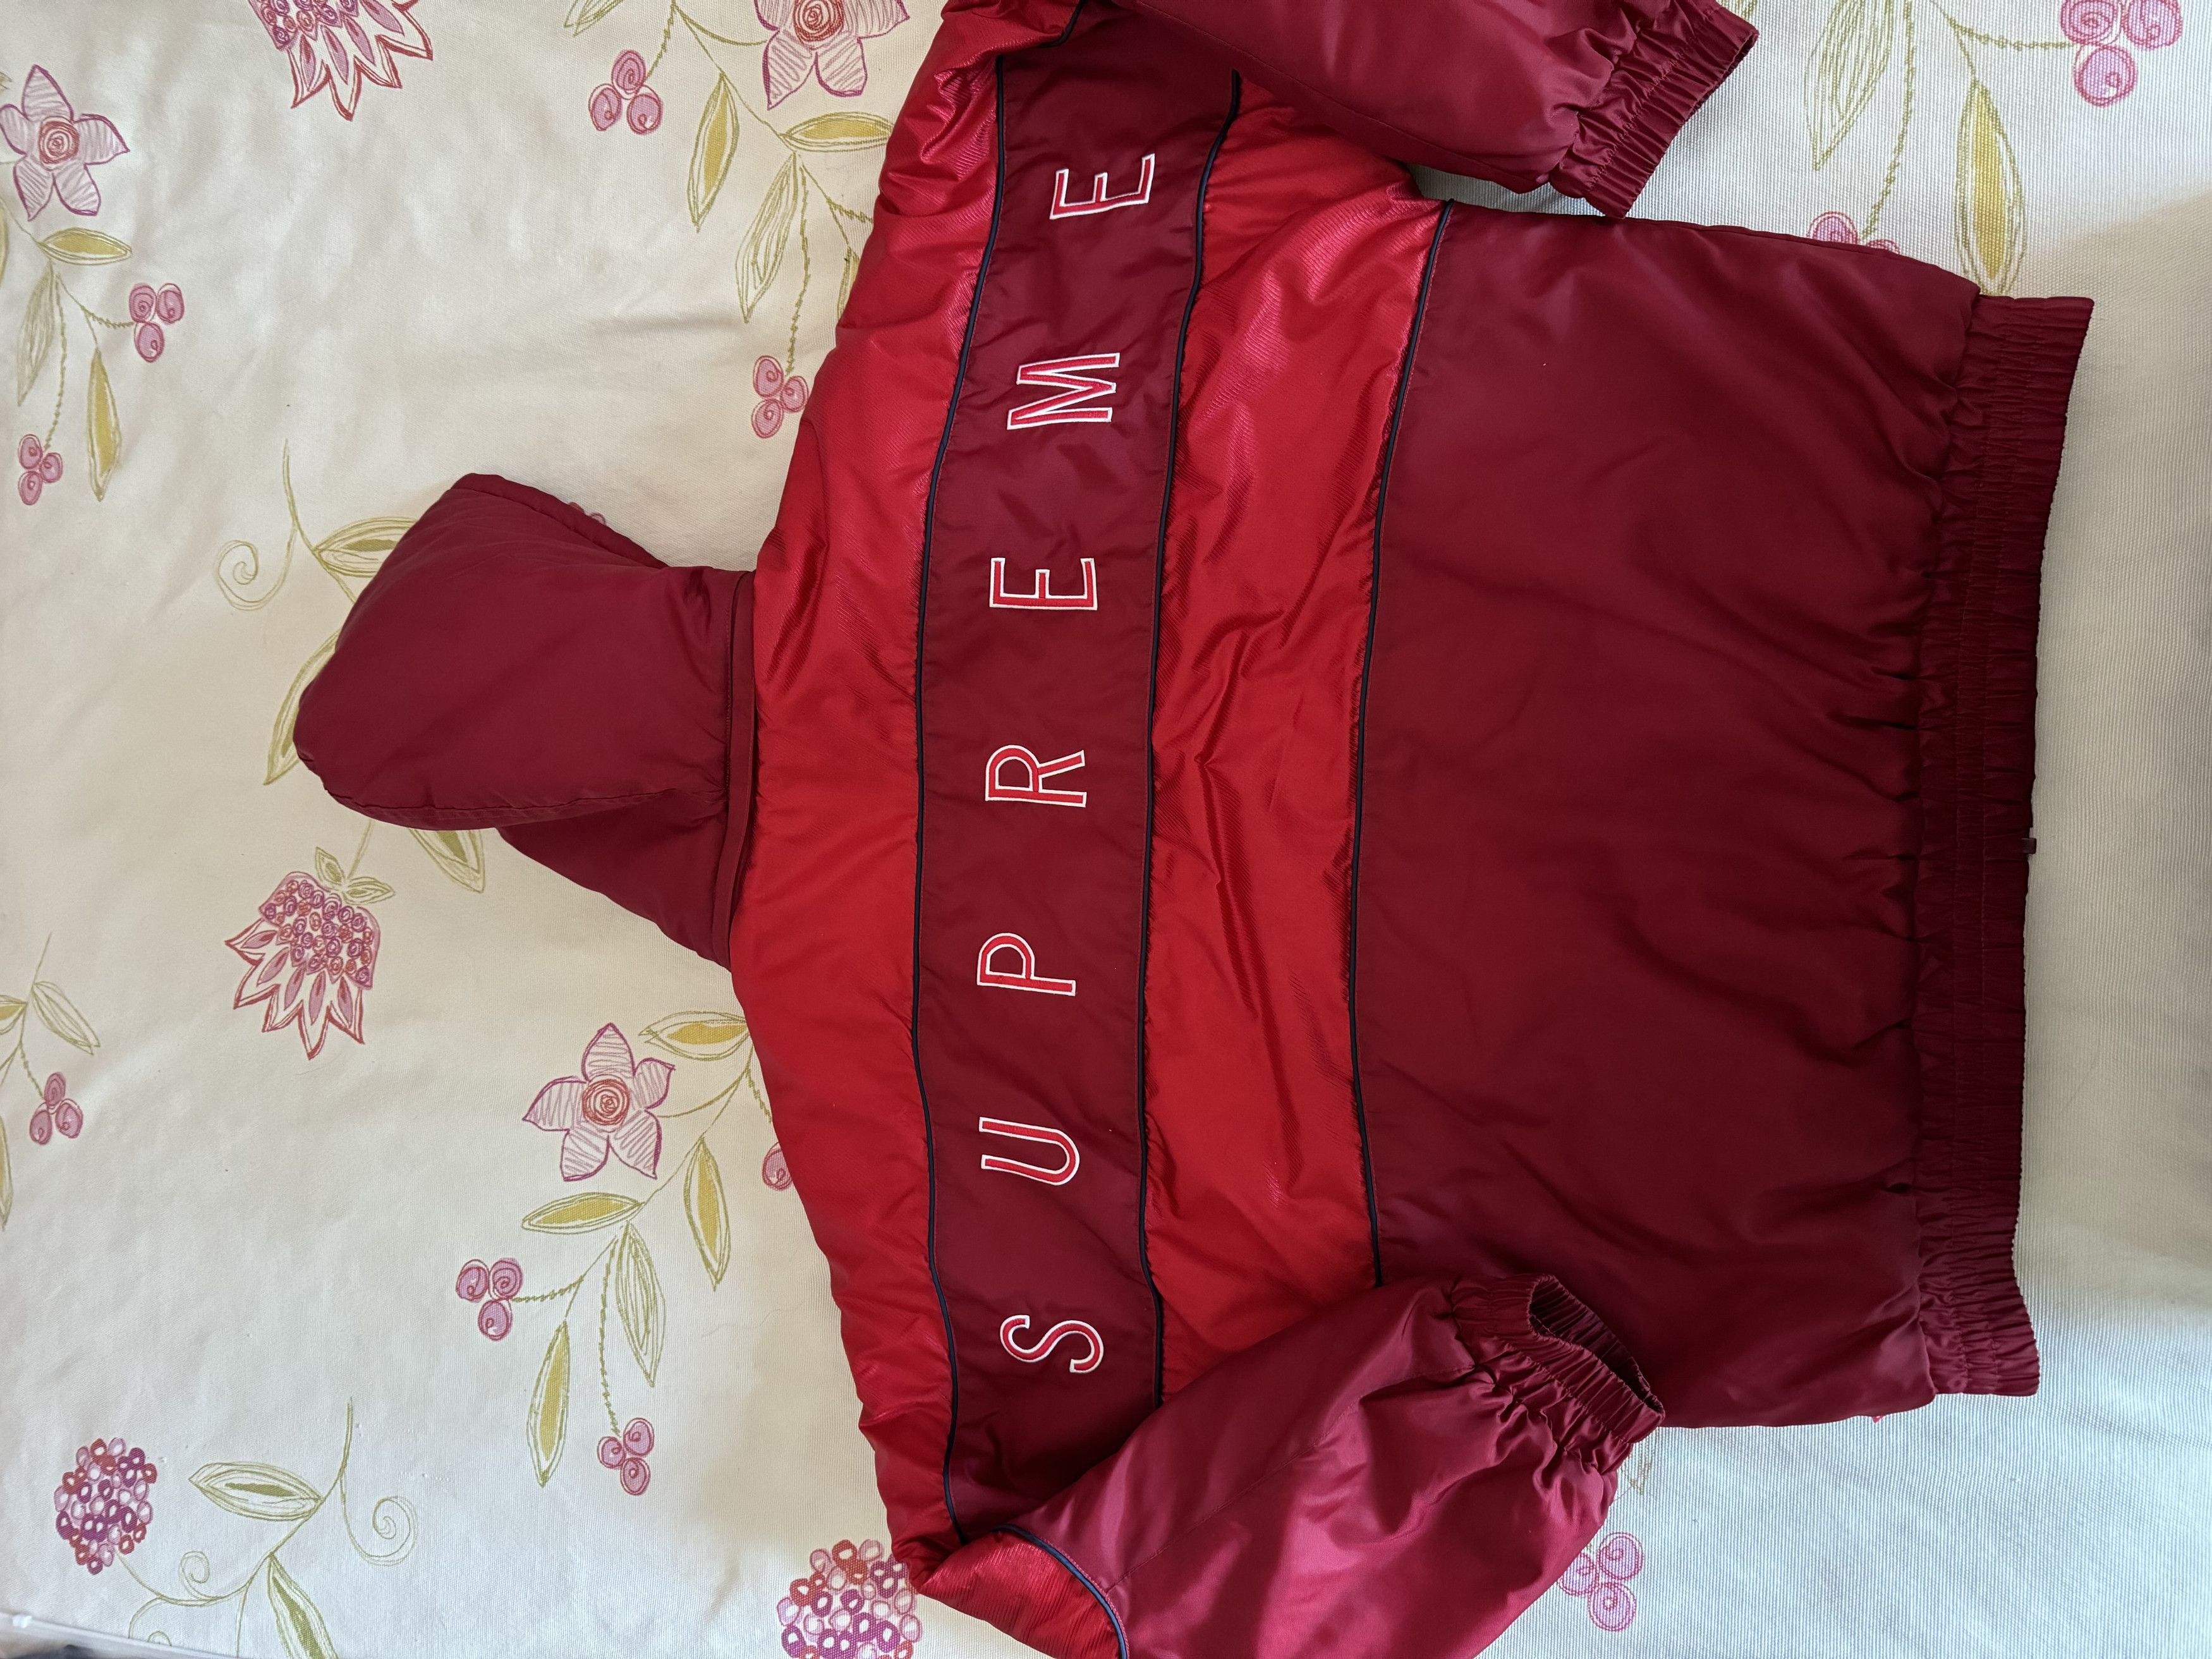 Supreme Supreme Sports Piping Puffy Jacket | Grailed